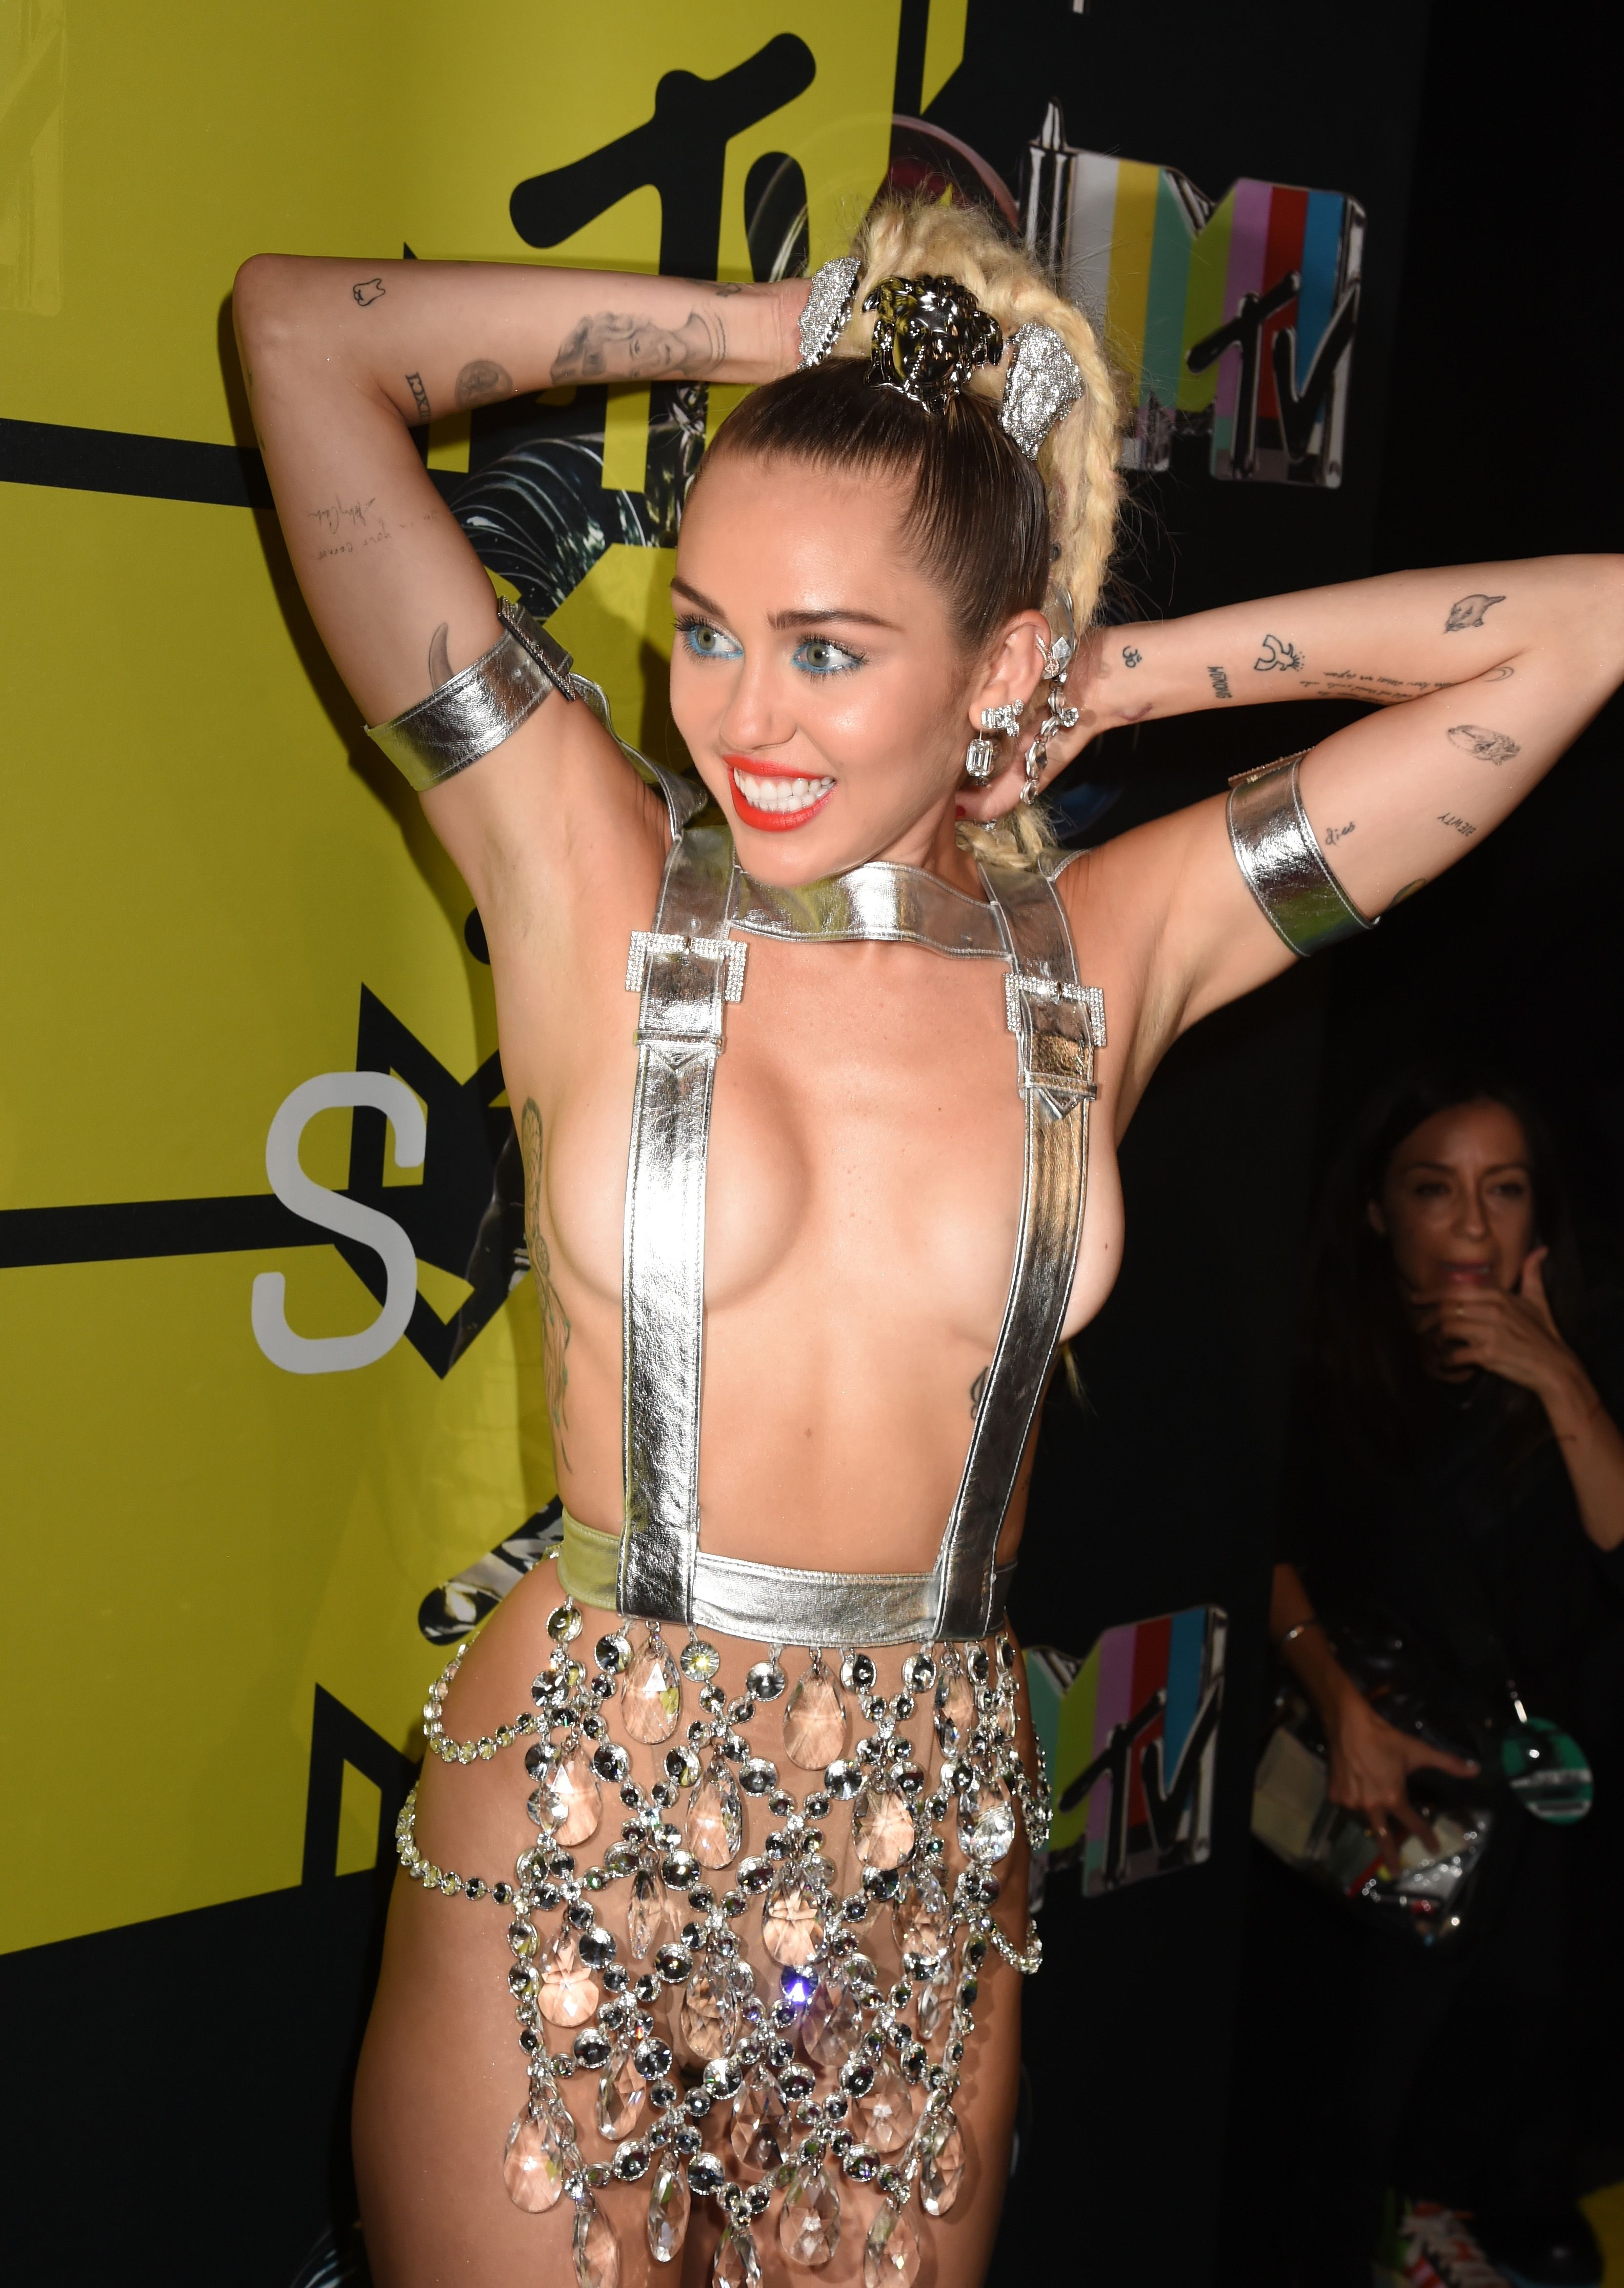 Miley Cyrus's Tattoos - Photos and Meaning of Miley Cyrus' Tattoos